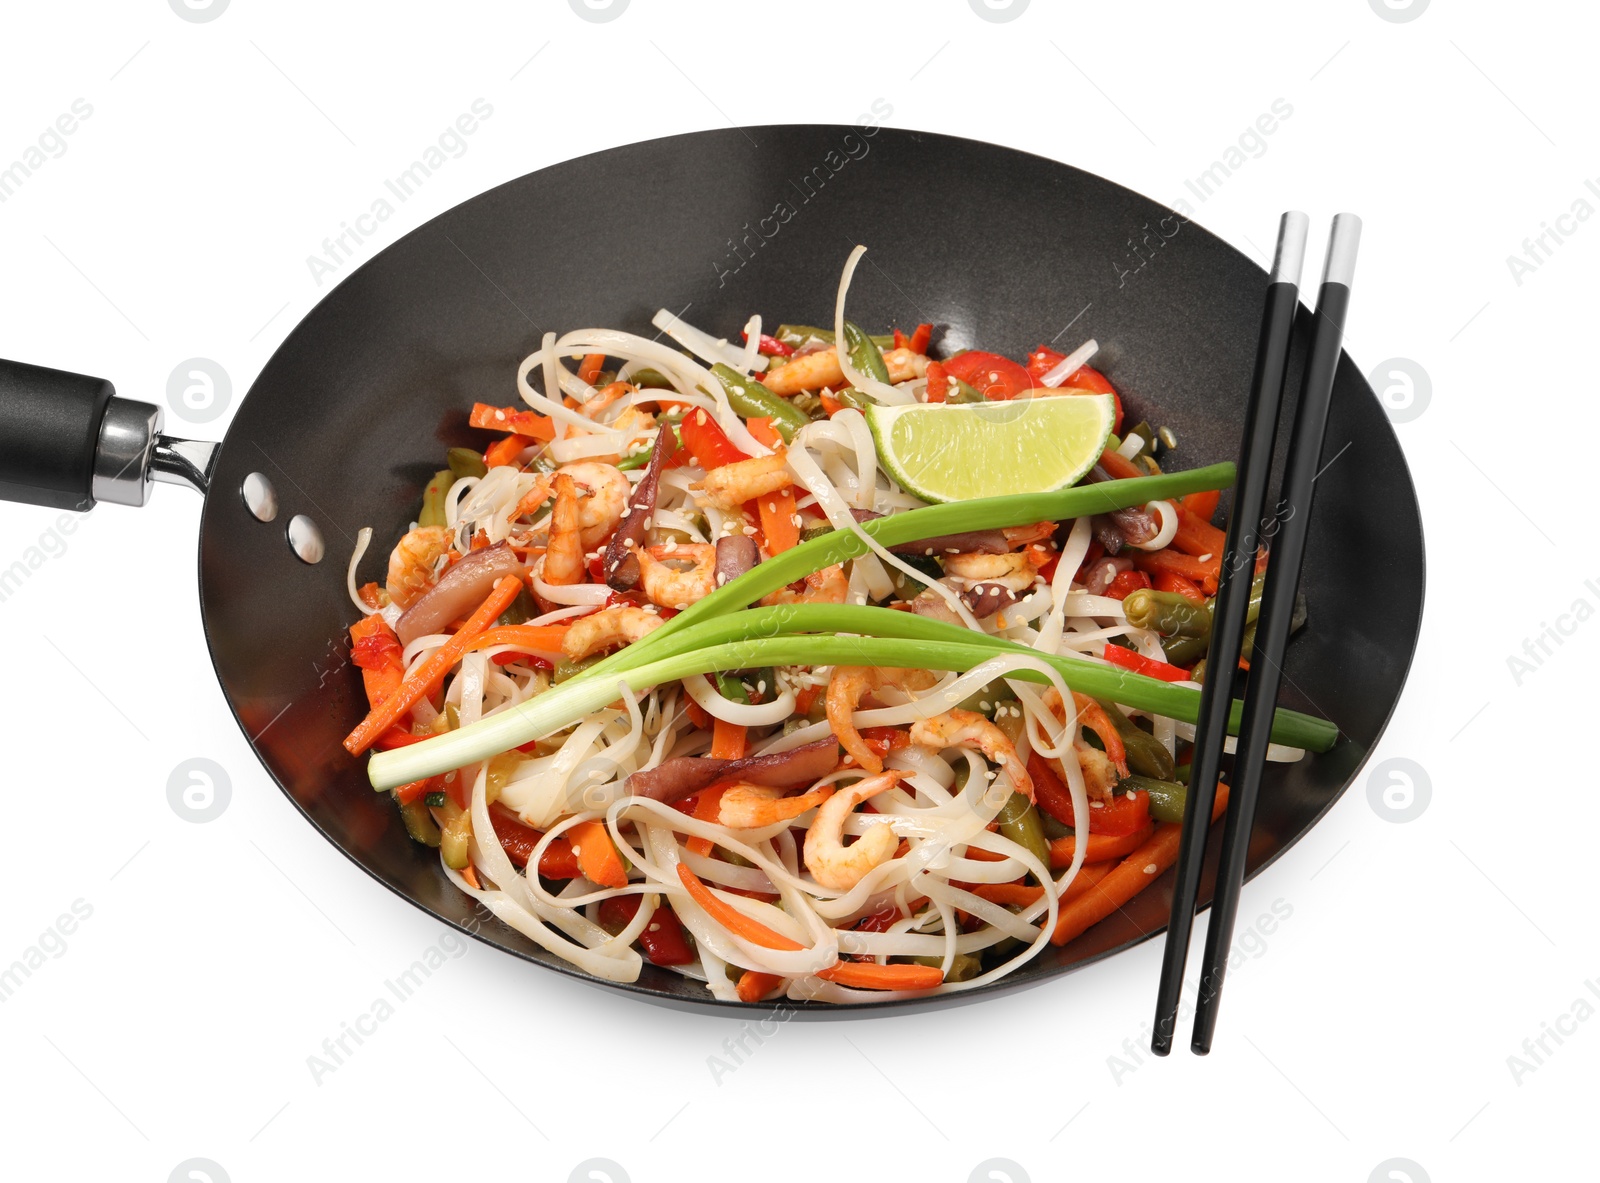 Photo of Shrimp stir fry with noodles and vegetables in wok isolated on white